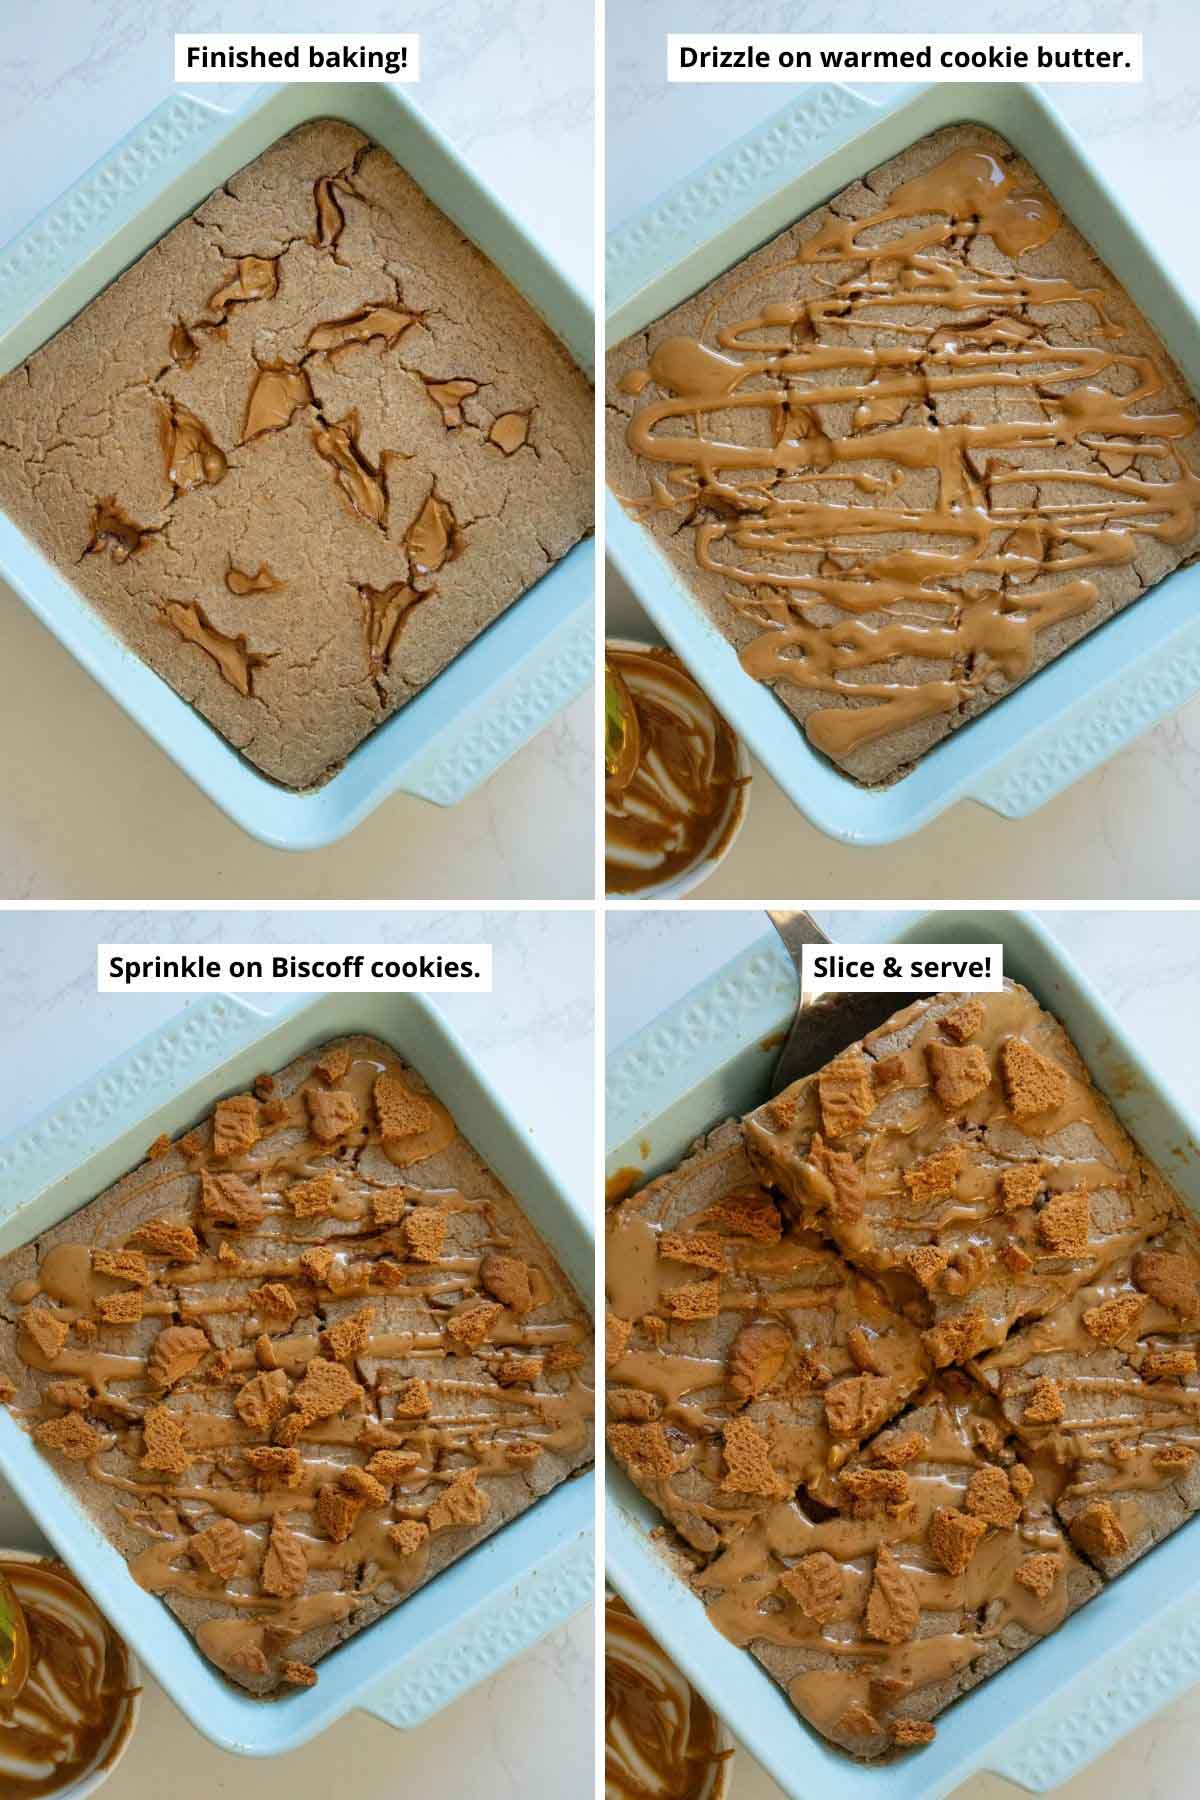 image collage showing the pan of baked oats in the pan just after baking, drizzled with cookie butter, sprinkled with Biscoff cookies, and being served with a spatula